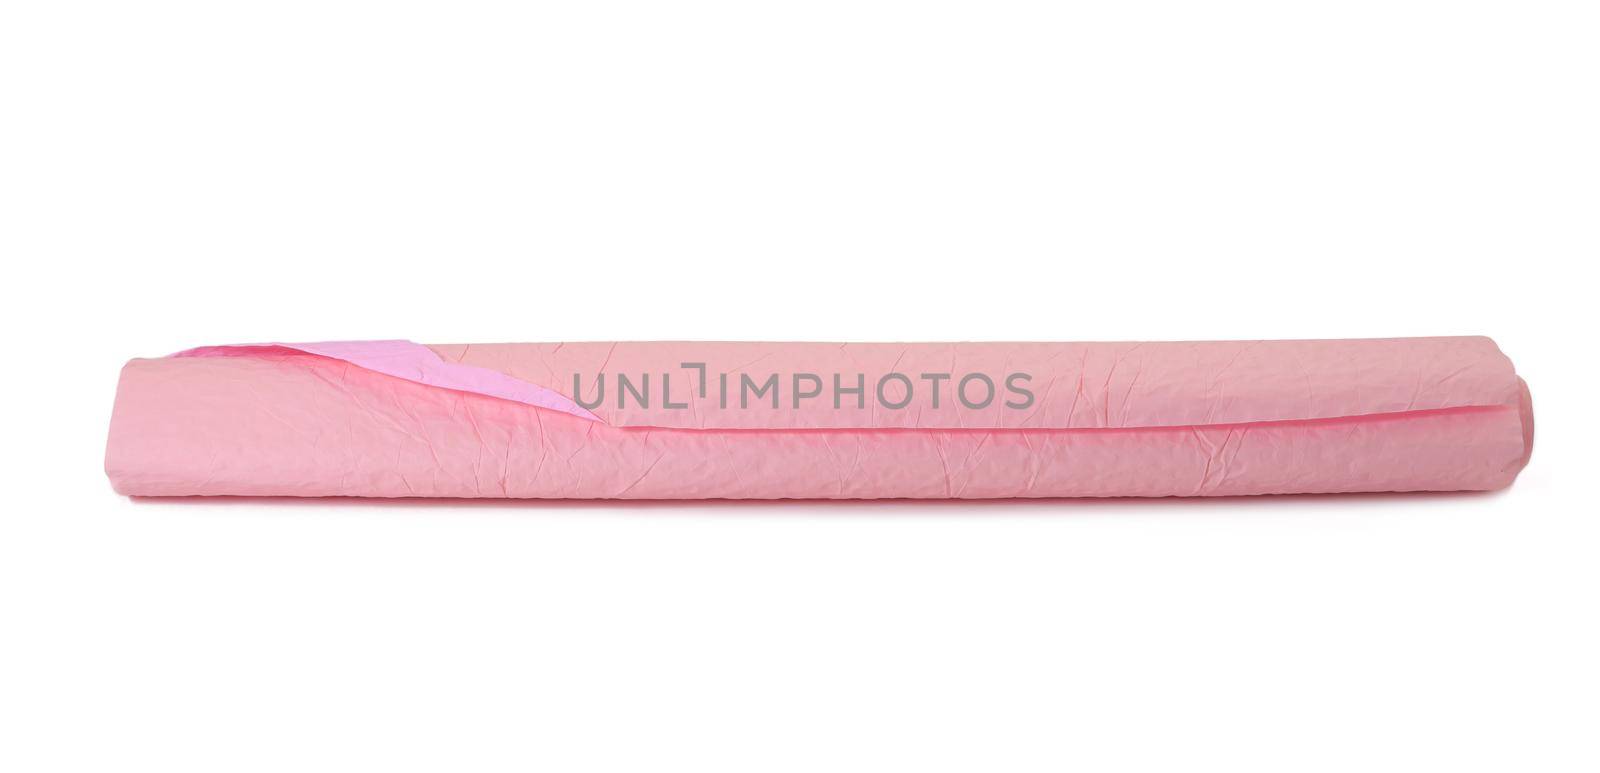 roll of pink crumpled paper for gift wrapping isolated on white background